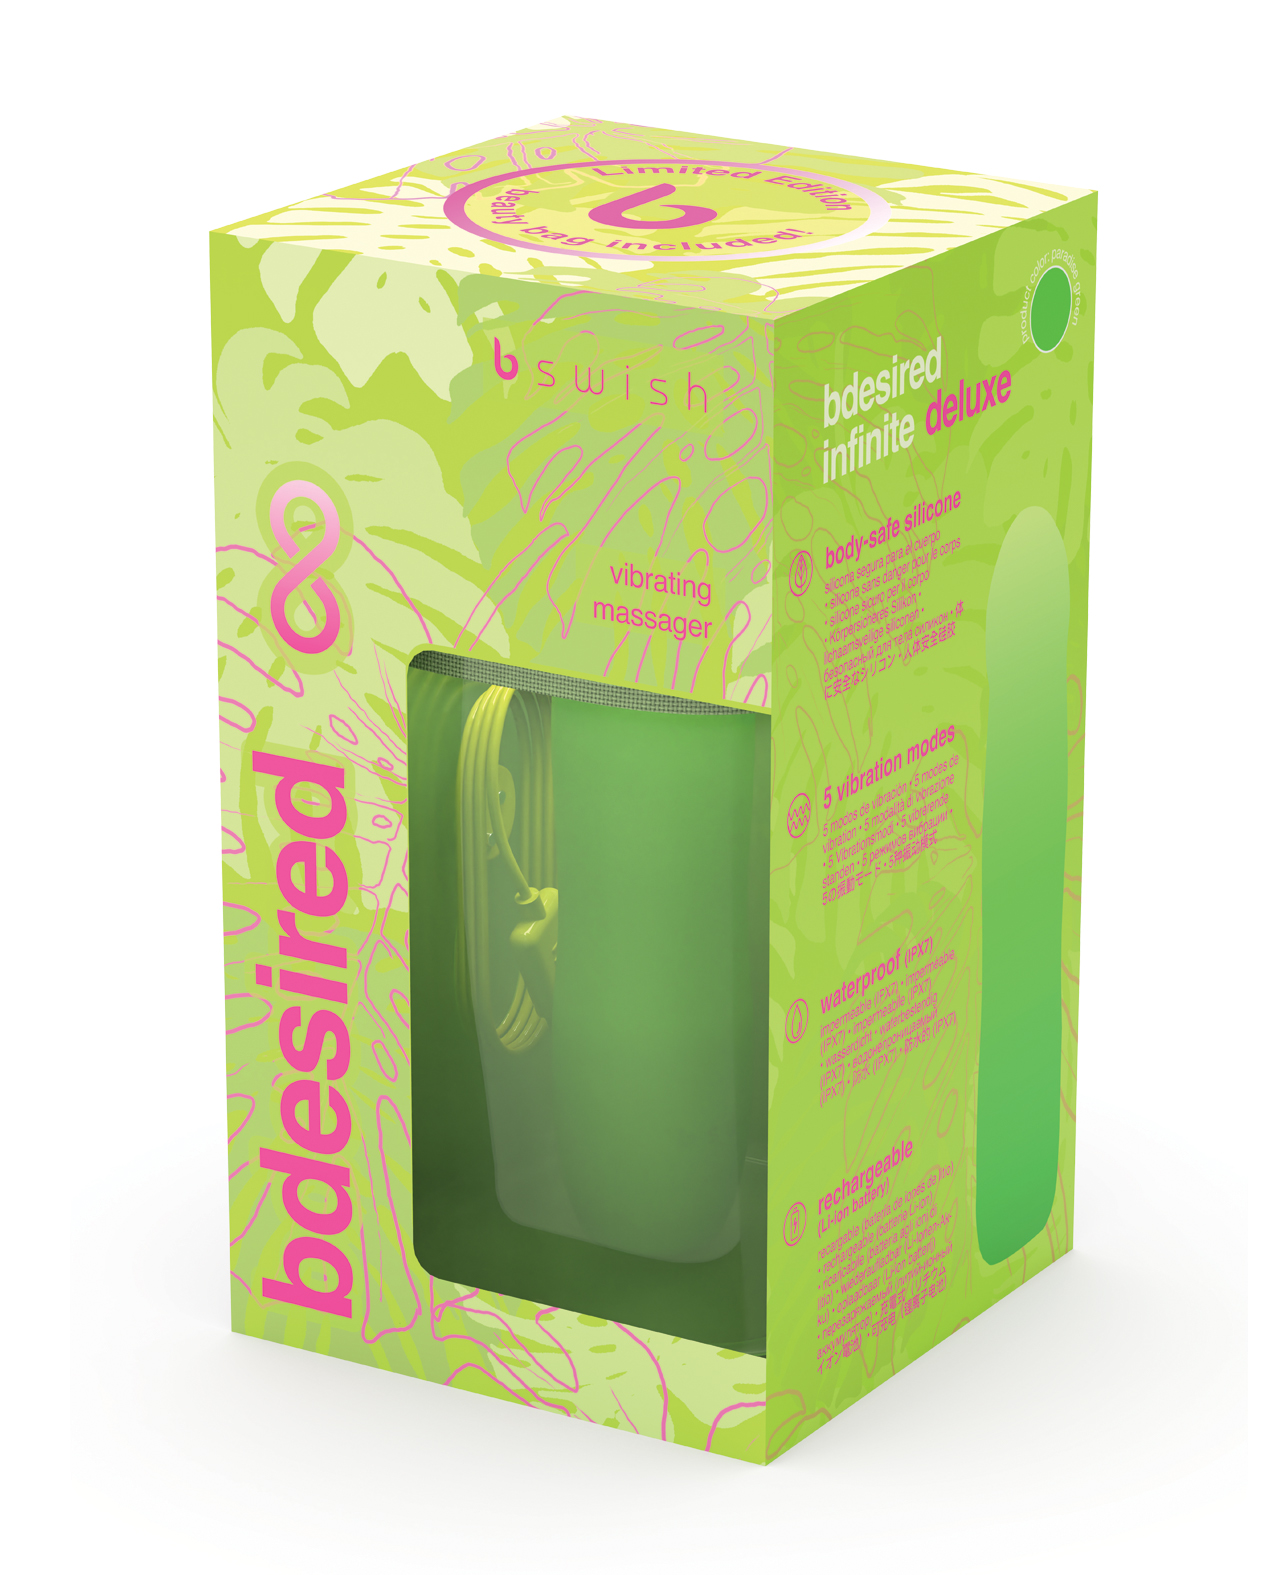 Bdesired Infinite Deluxe Limited Edition Paradise Vibrator - Green